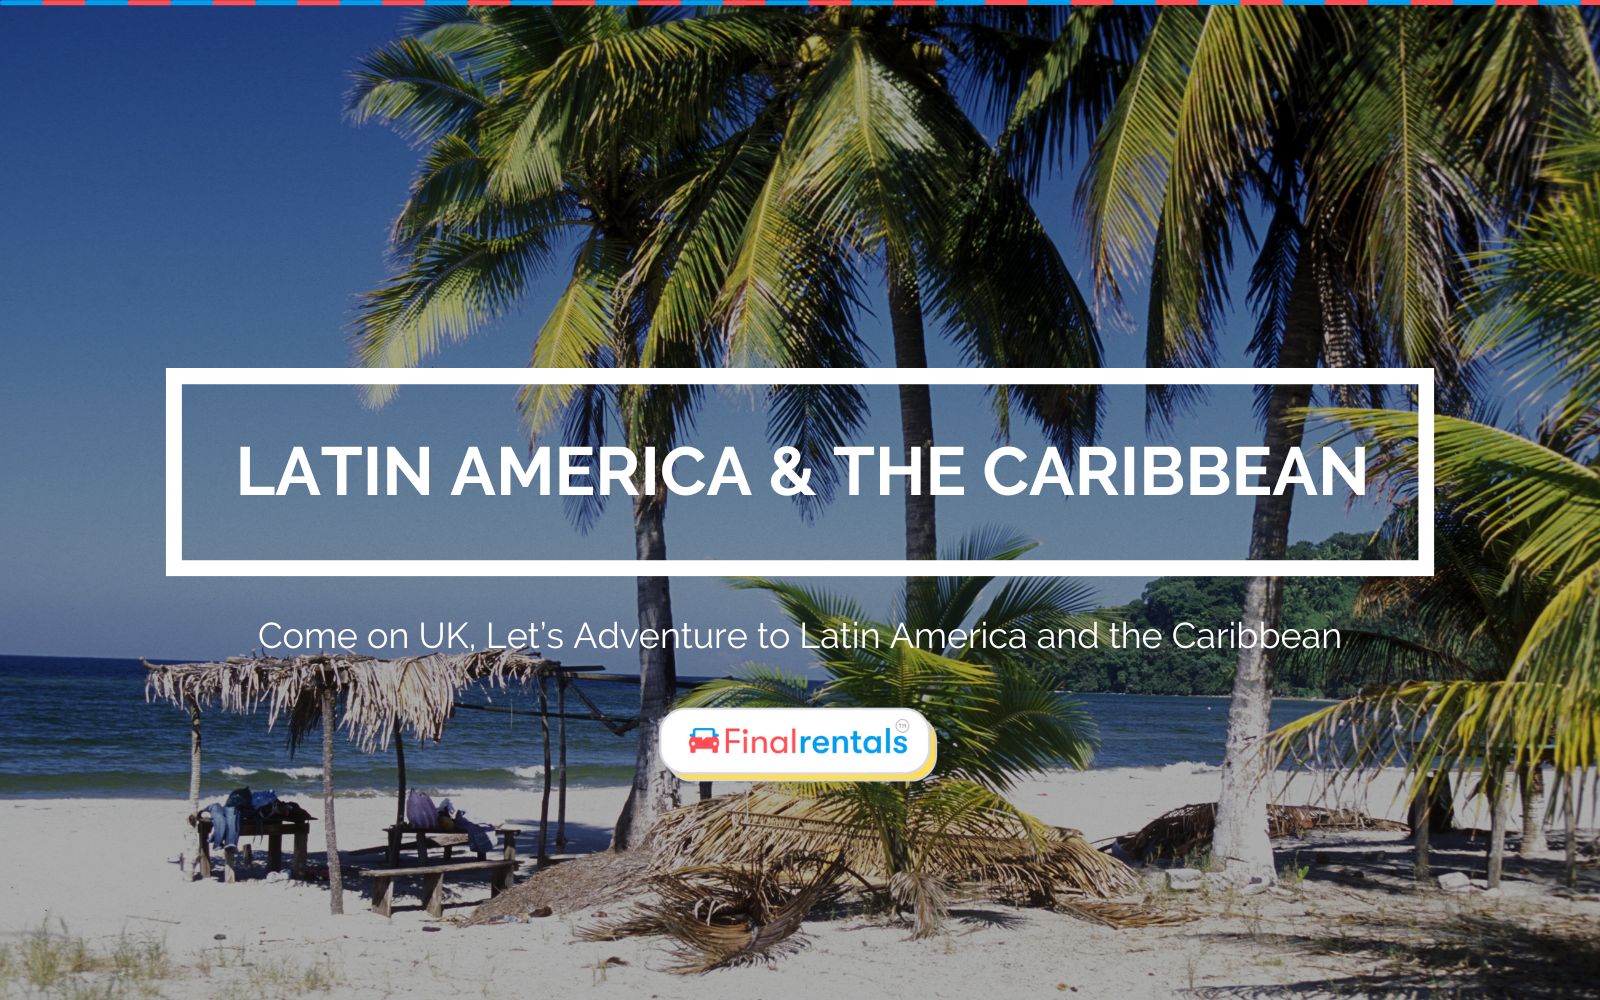 UK, Let’s Adventure to Latin America and the Caribbean